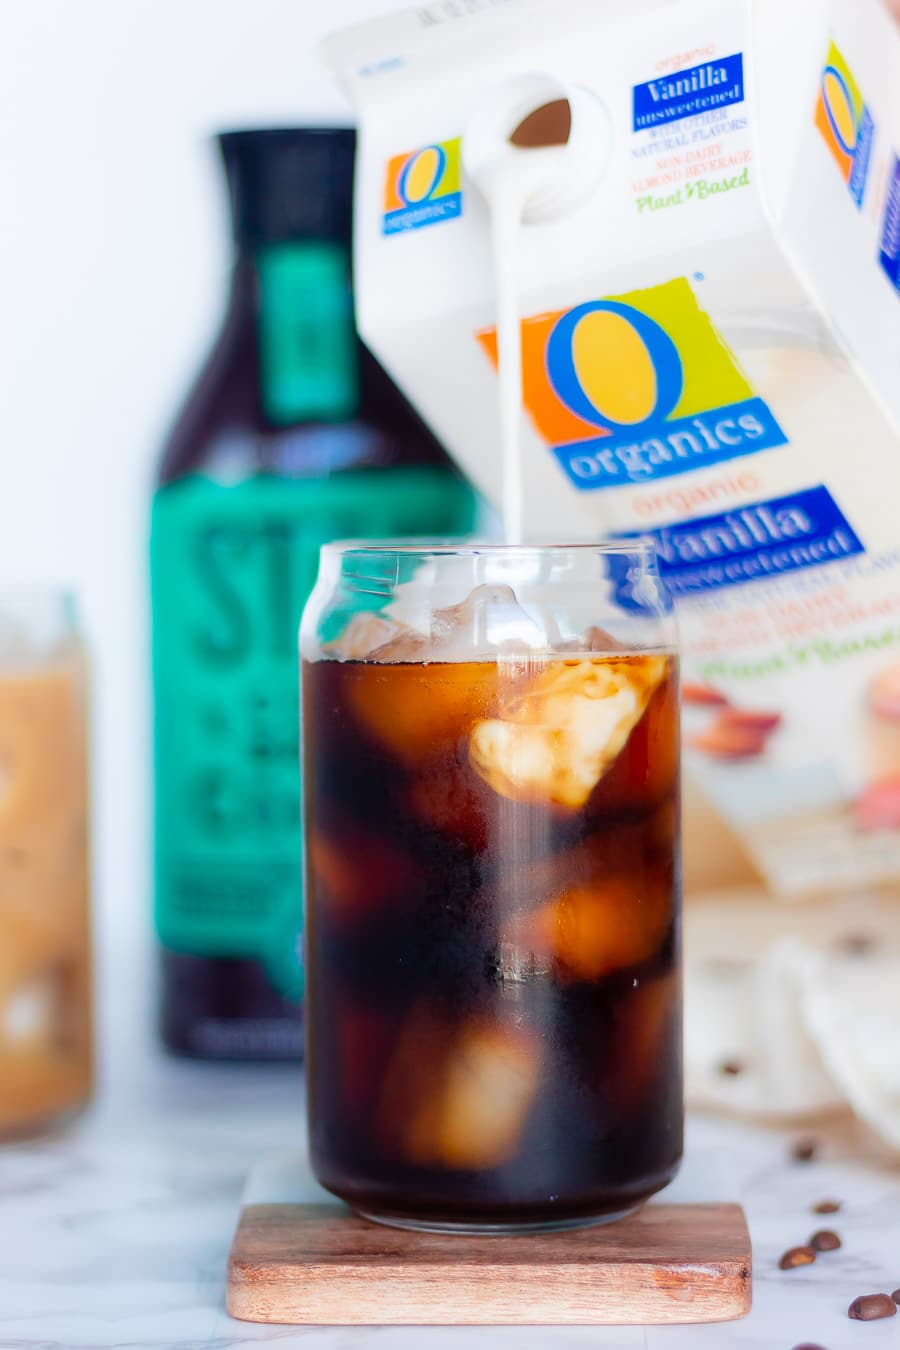 Starbucks Honey Almond Milk Cold Brew. Starbucks cold brew recipes are some of my favorite Starbucks recipes to make at home. Homemade cold beer is easy to make, or for the price of a Starbucks cold beer, you can buy it separately at the store.